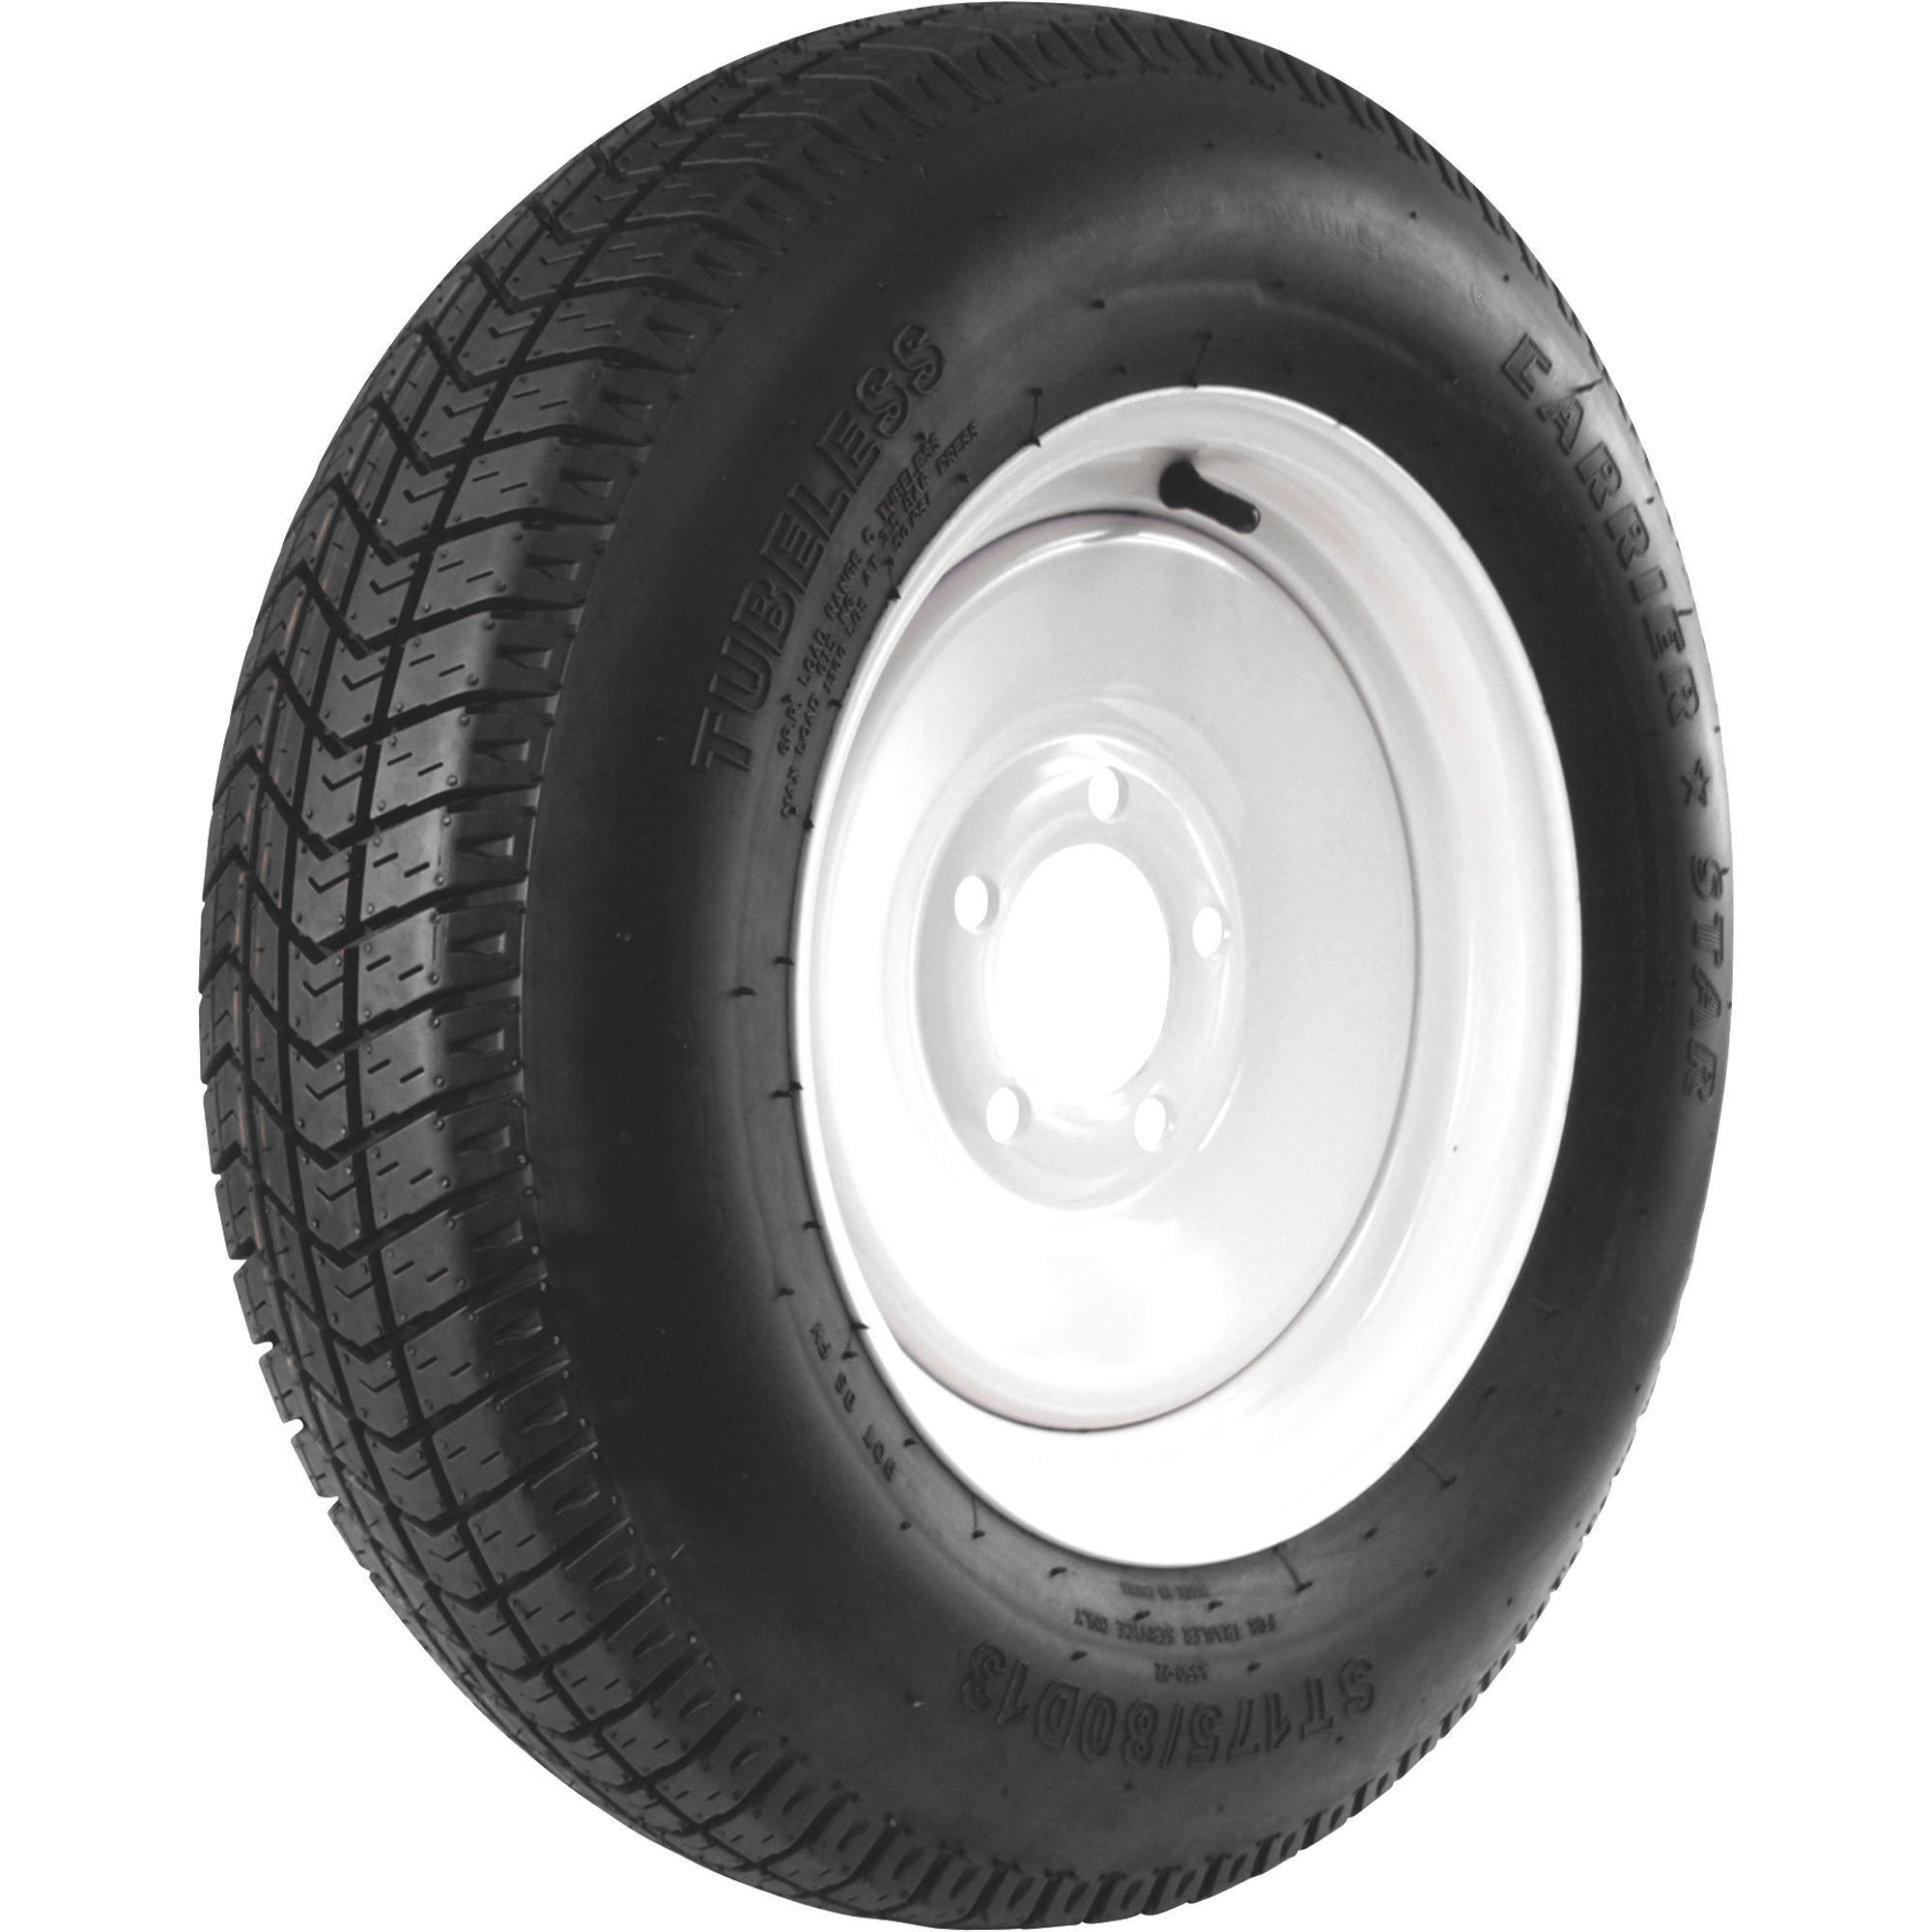 Martin Wheel Carrier Star 13Inch Bias-Ply Trailer Tire and Wheel Assembly â ST175/80D-13, 4-Hole, Load Range B, Model DM175D3B-4T